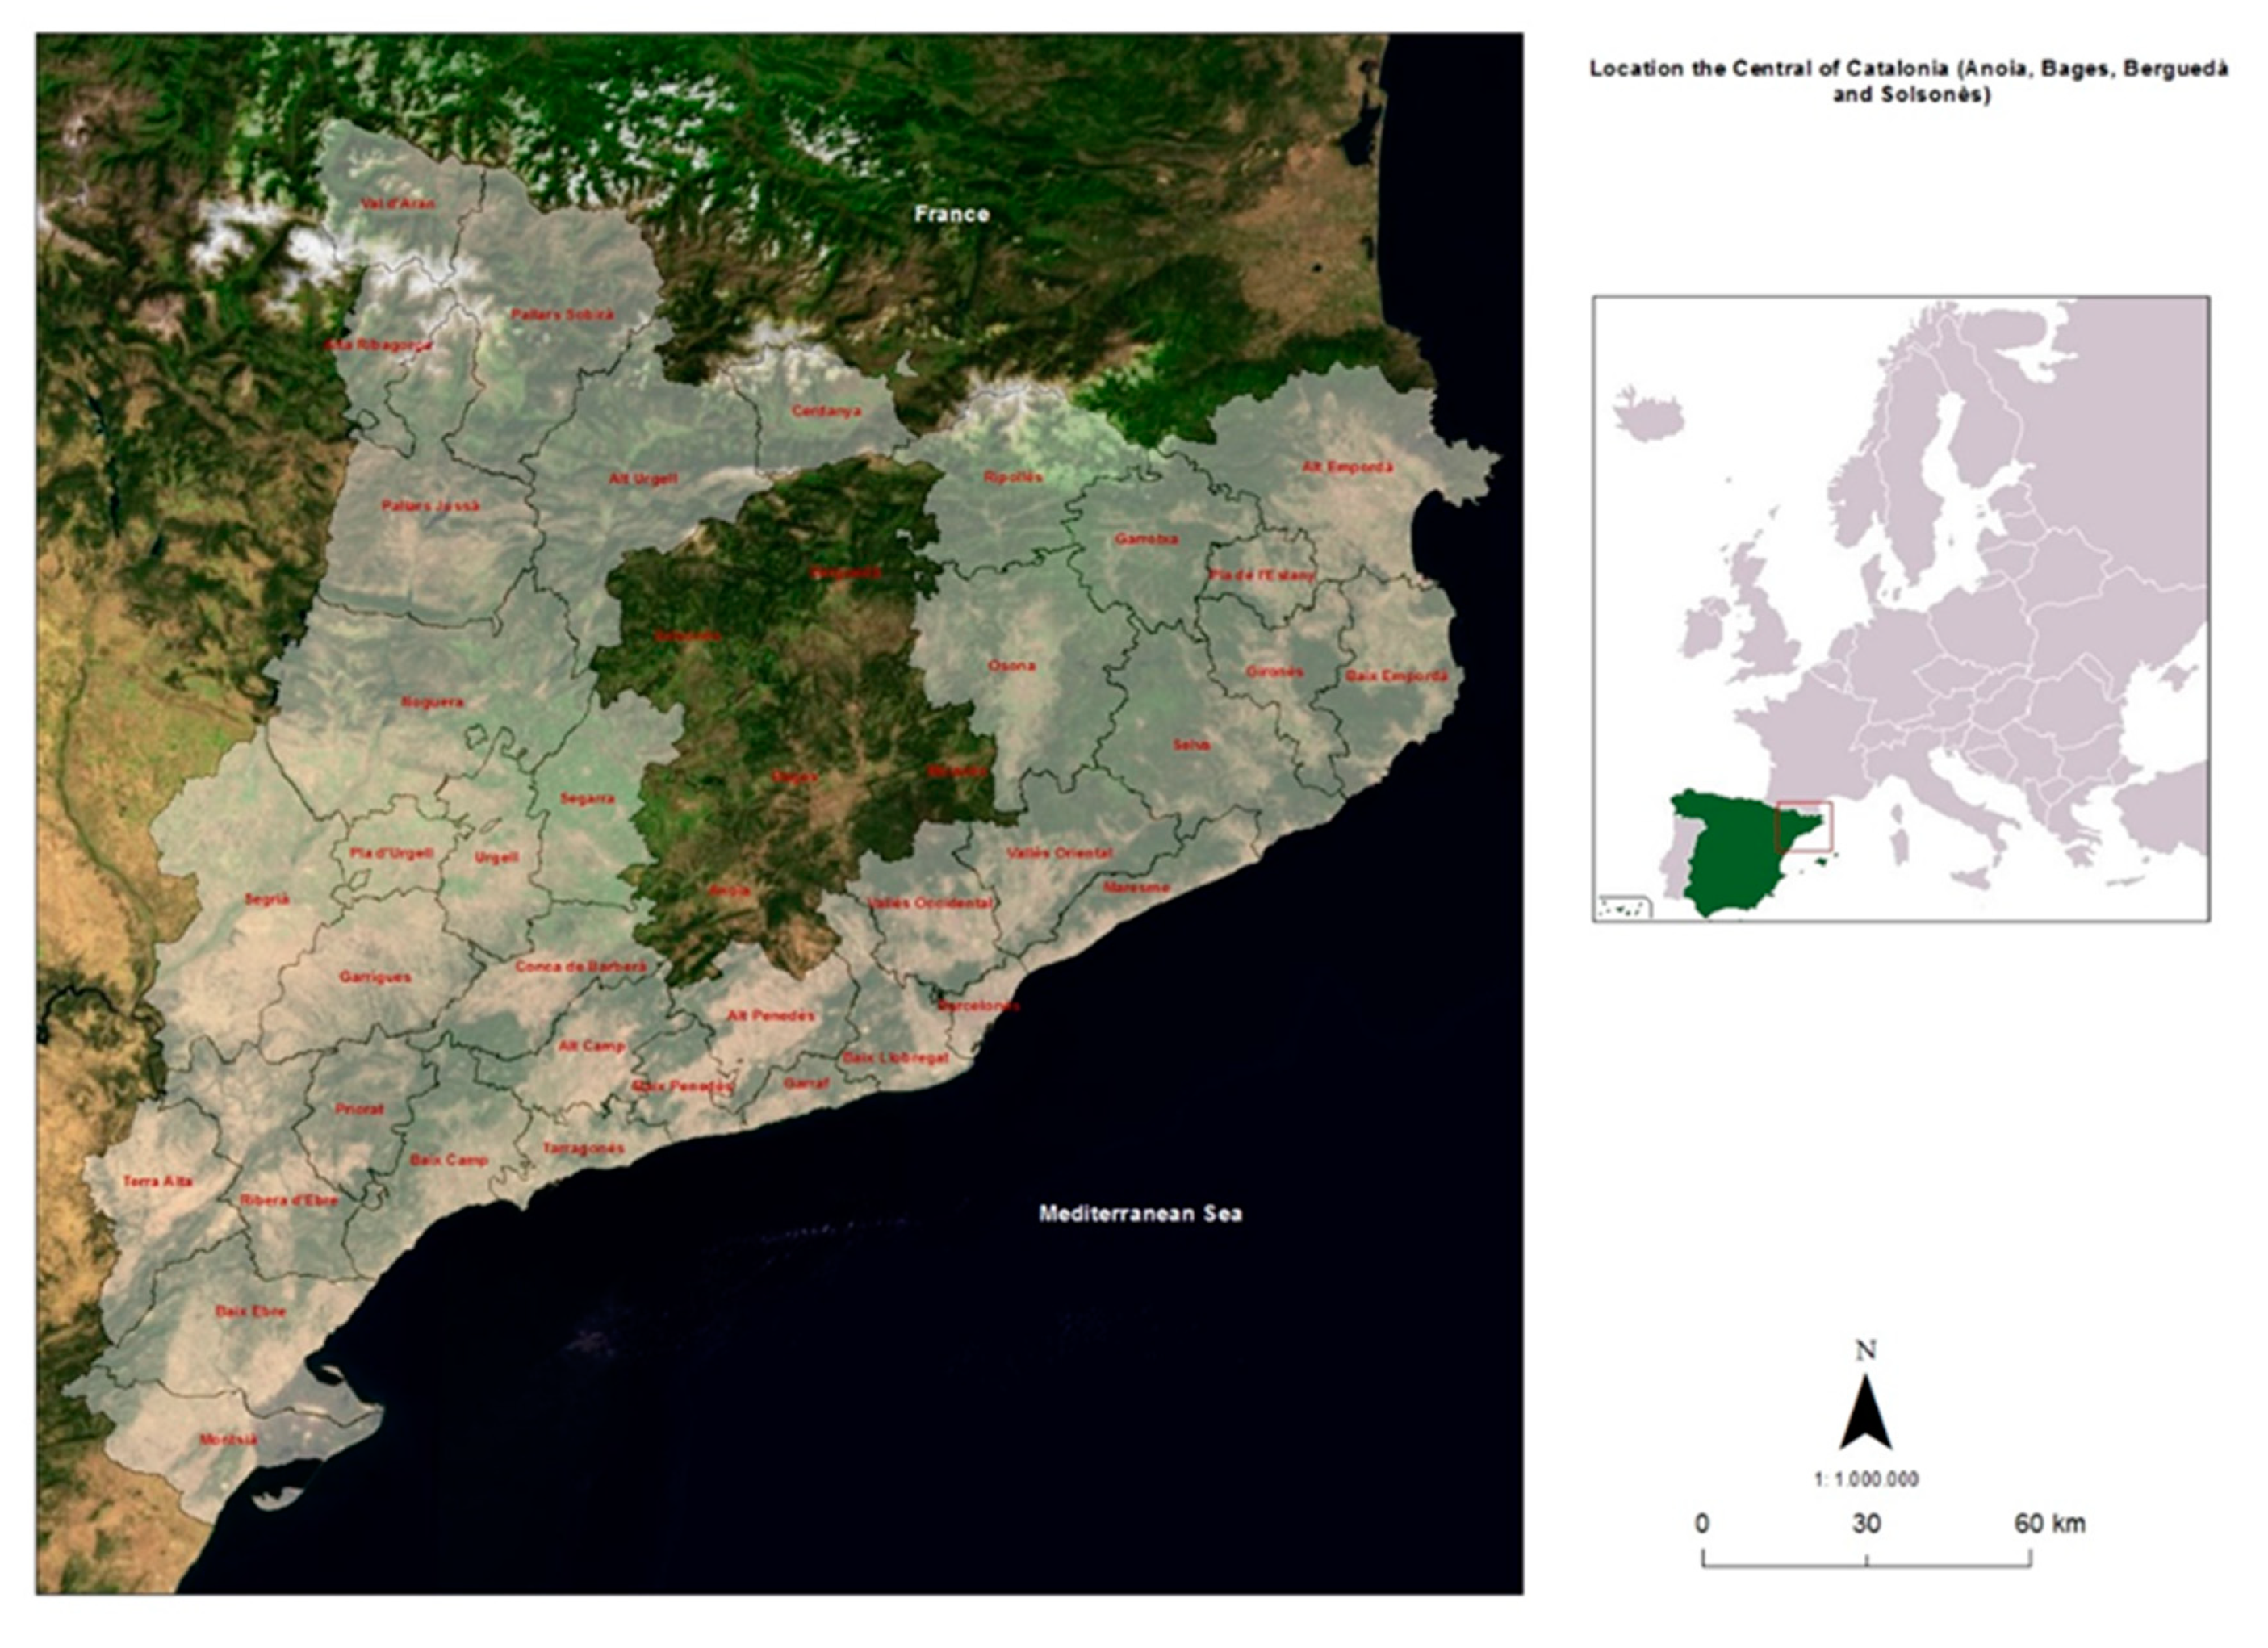 Sustainability | Free Full-Text | After the Wildfires: The Processes of  Social Learning of Forest Owners' Associations in Central Catalonia, Spain  | HTML